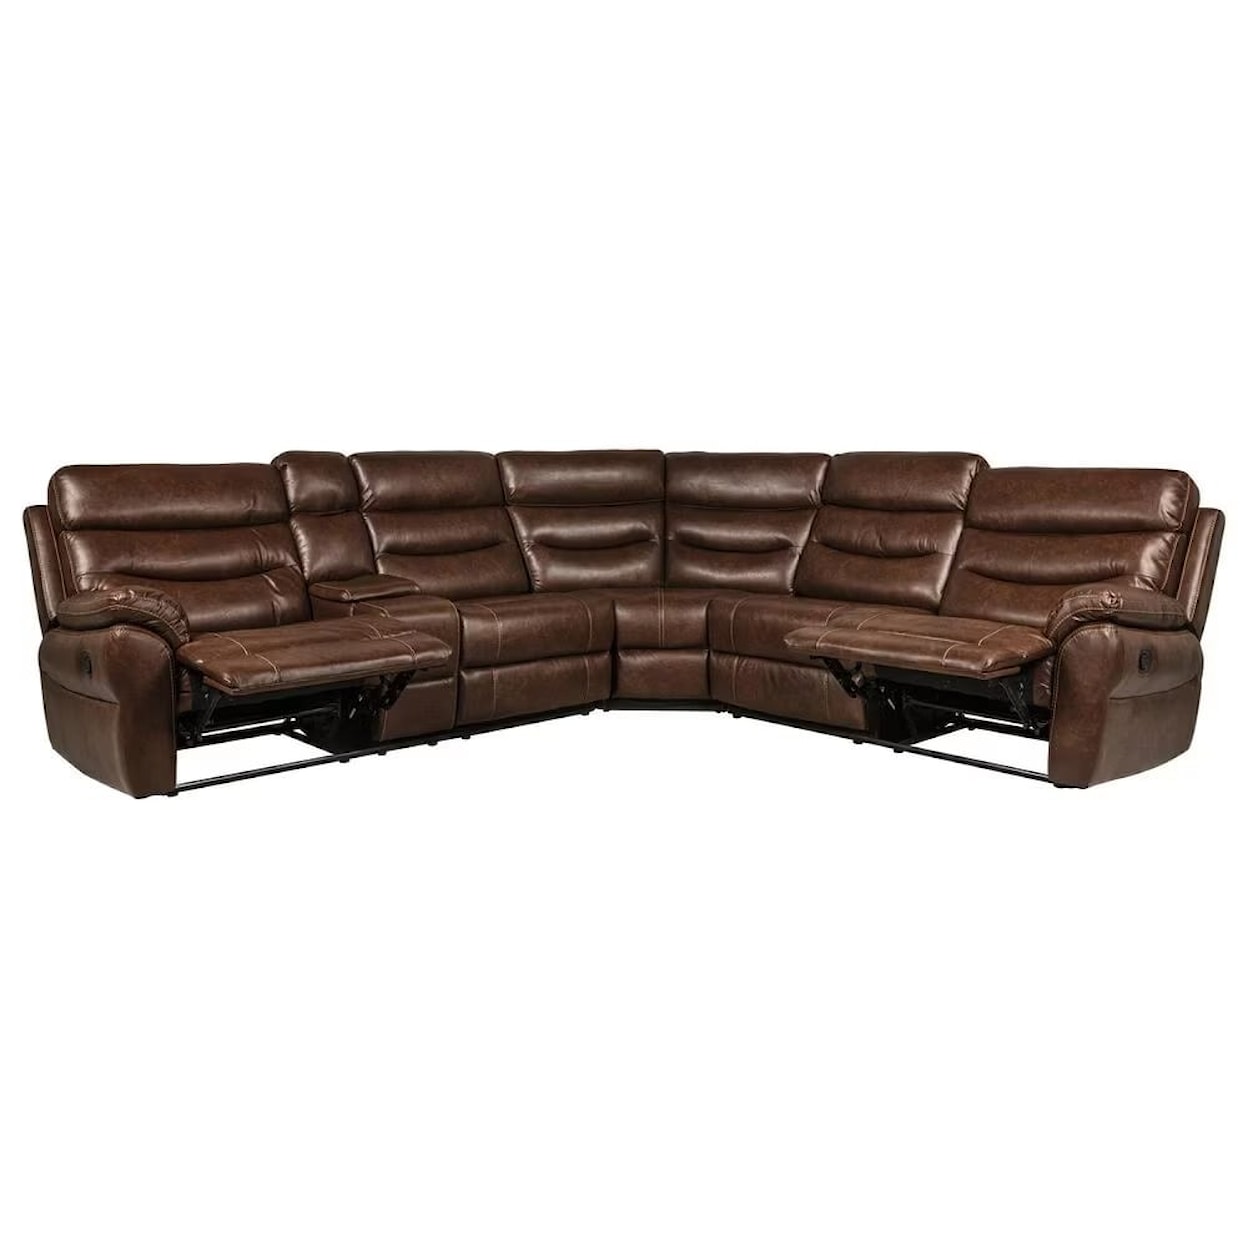 Stanbrook Home Weatherton Reclining Sectional